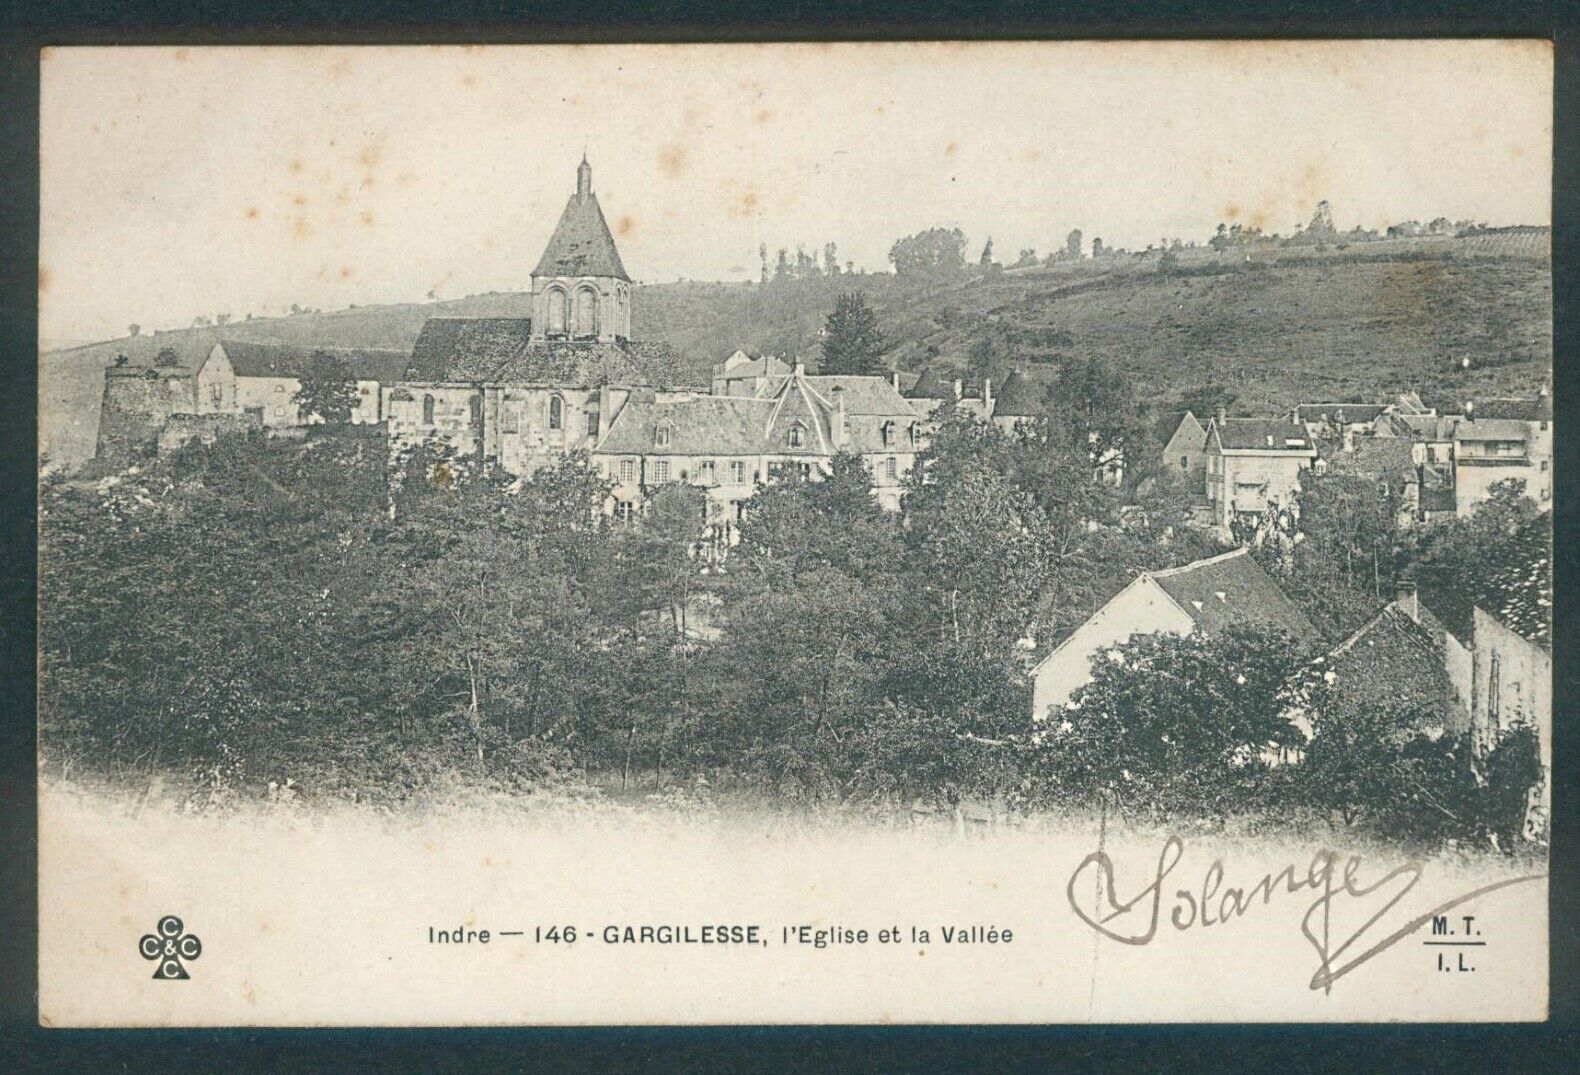 Cpa Indre - Gargilesse - Church and Valley - written 1902/1905